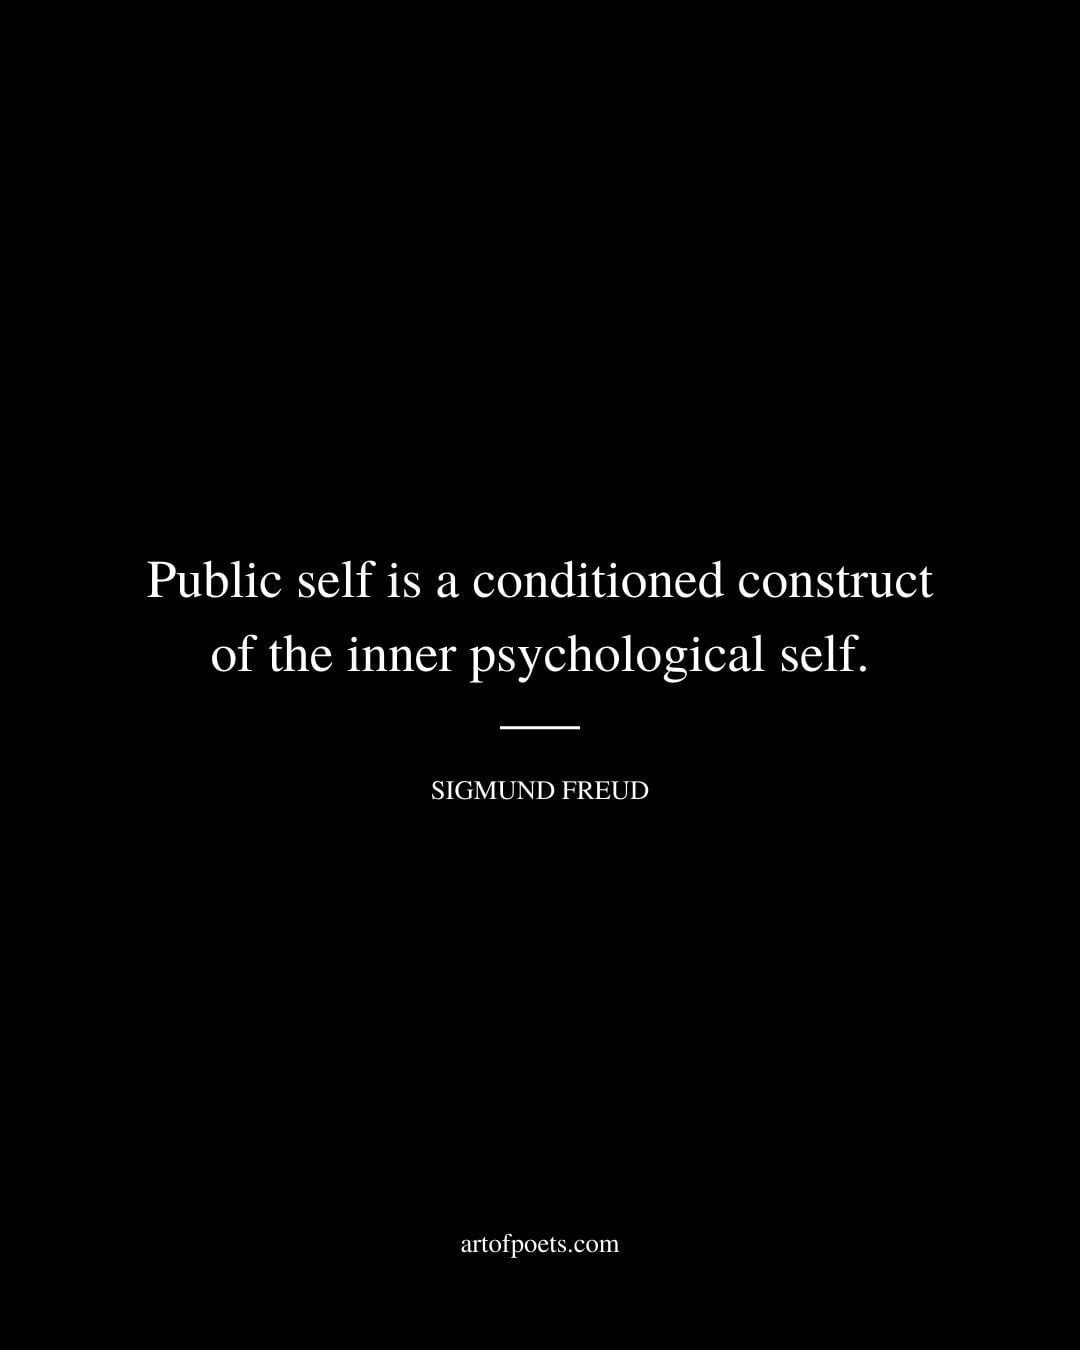 Public self is a conditioned construct of the inner psychological self